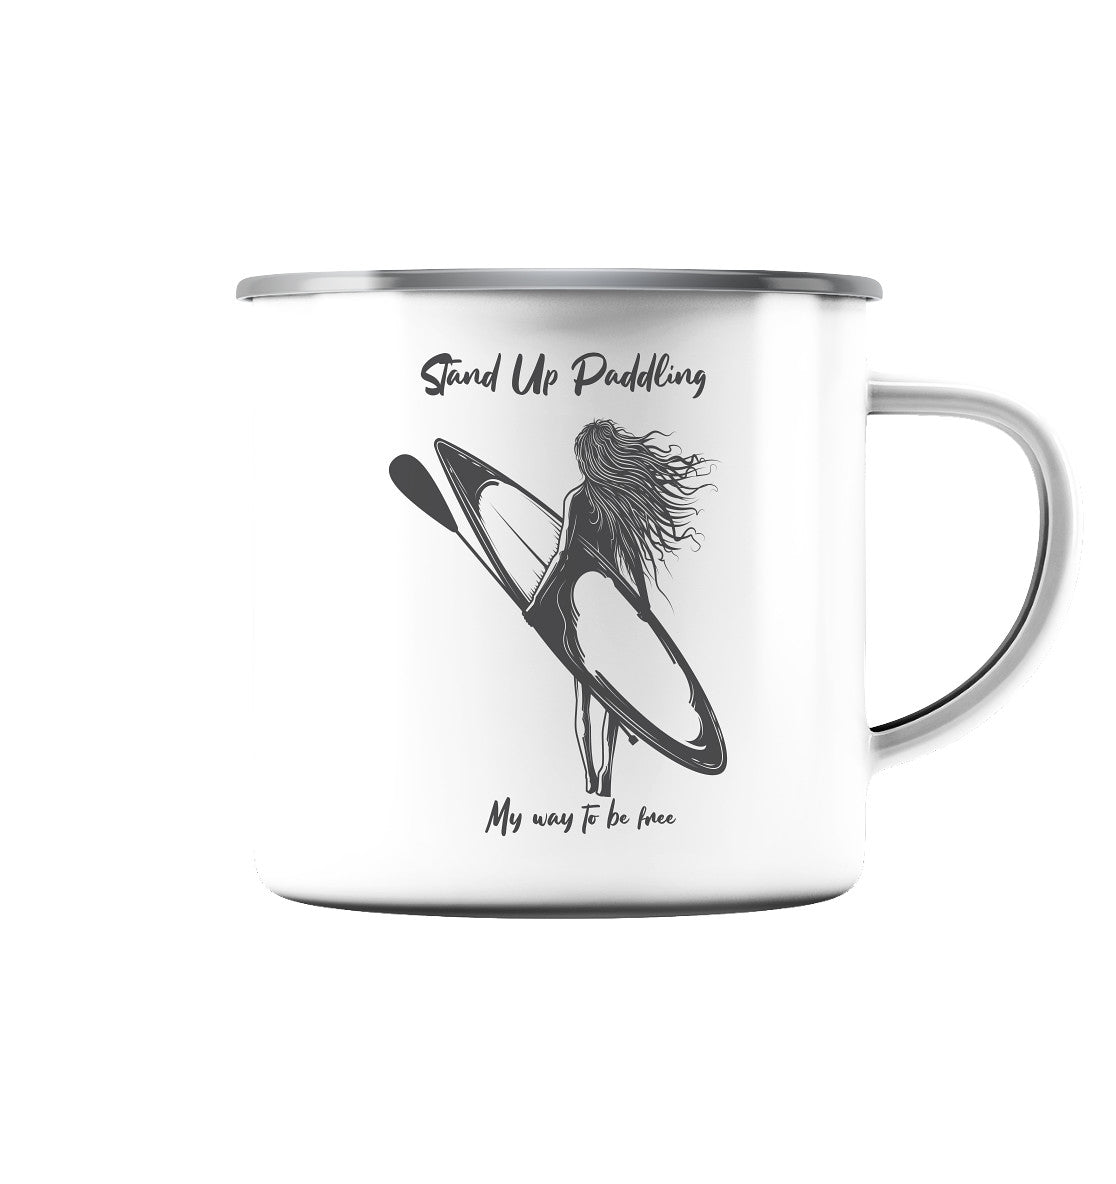 Stand Up Paddling- My way to be free - Emaille Tasse (Silber)